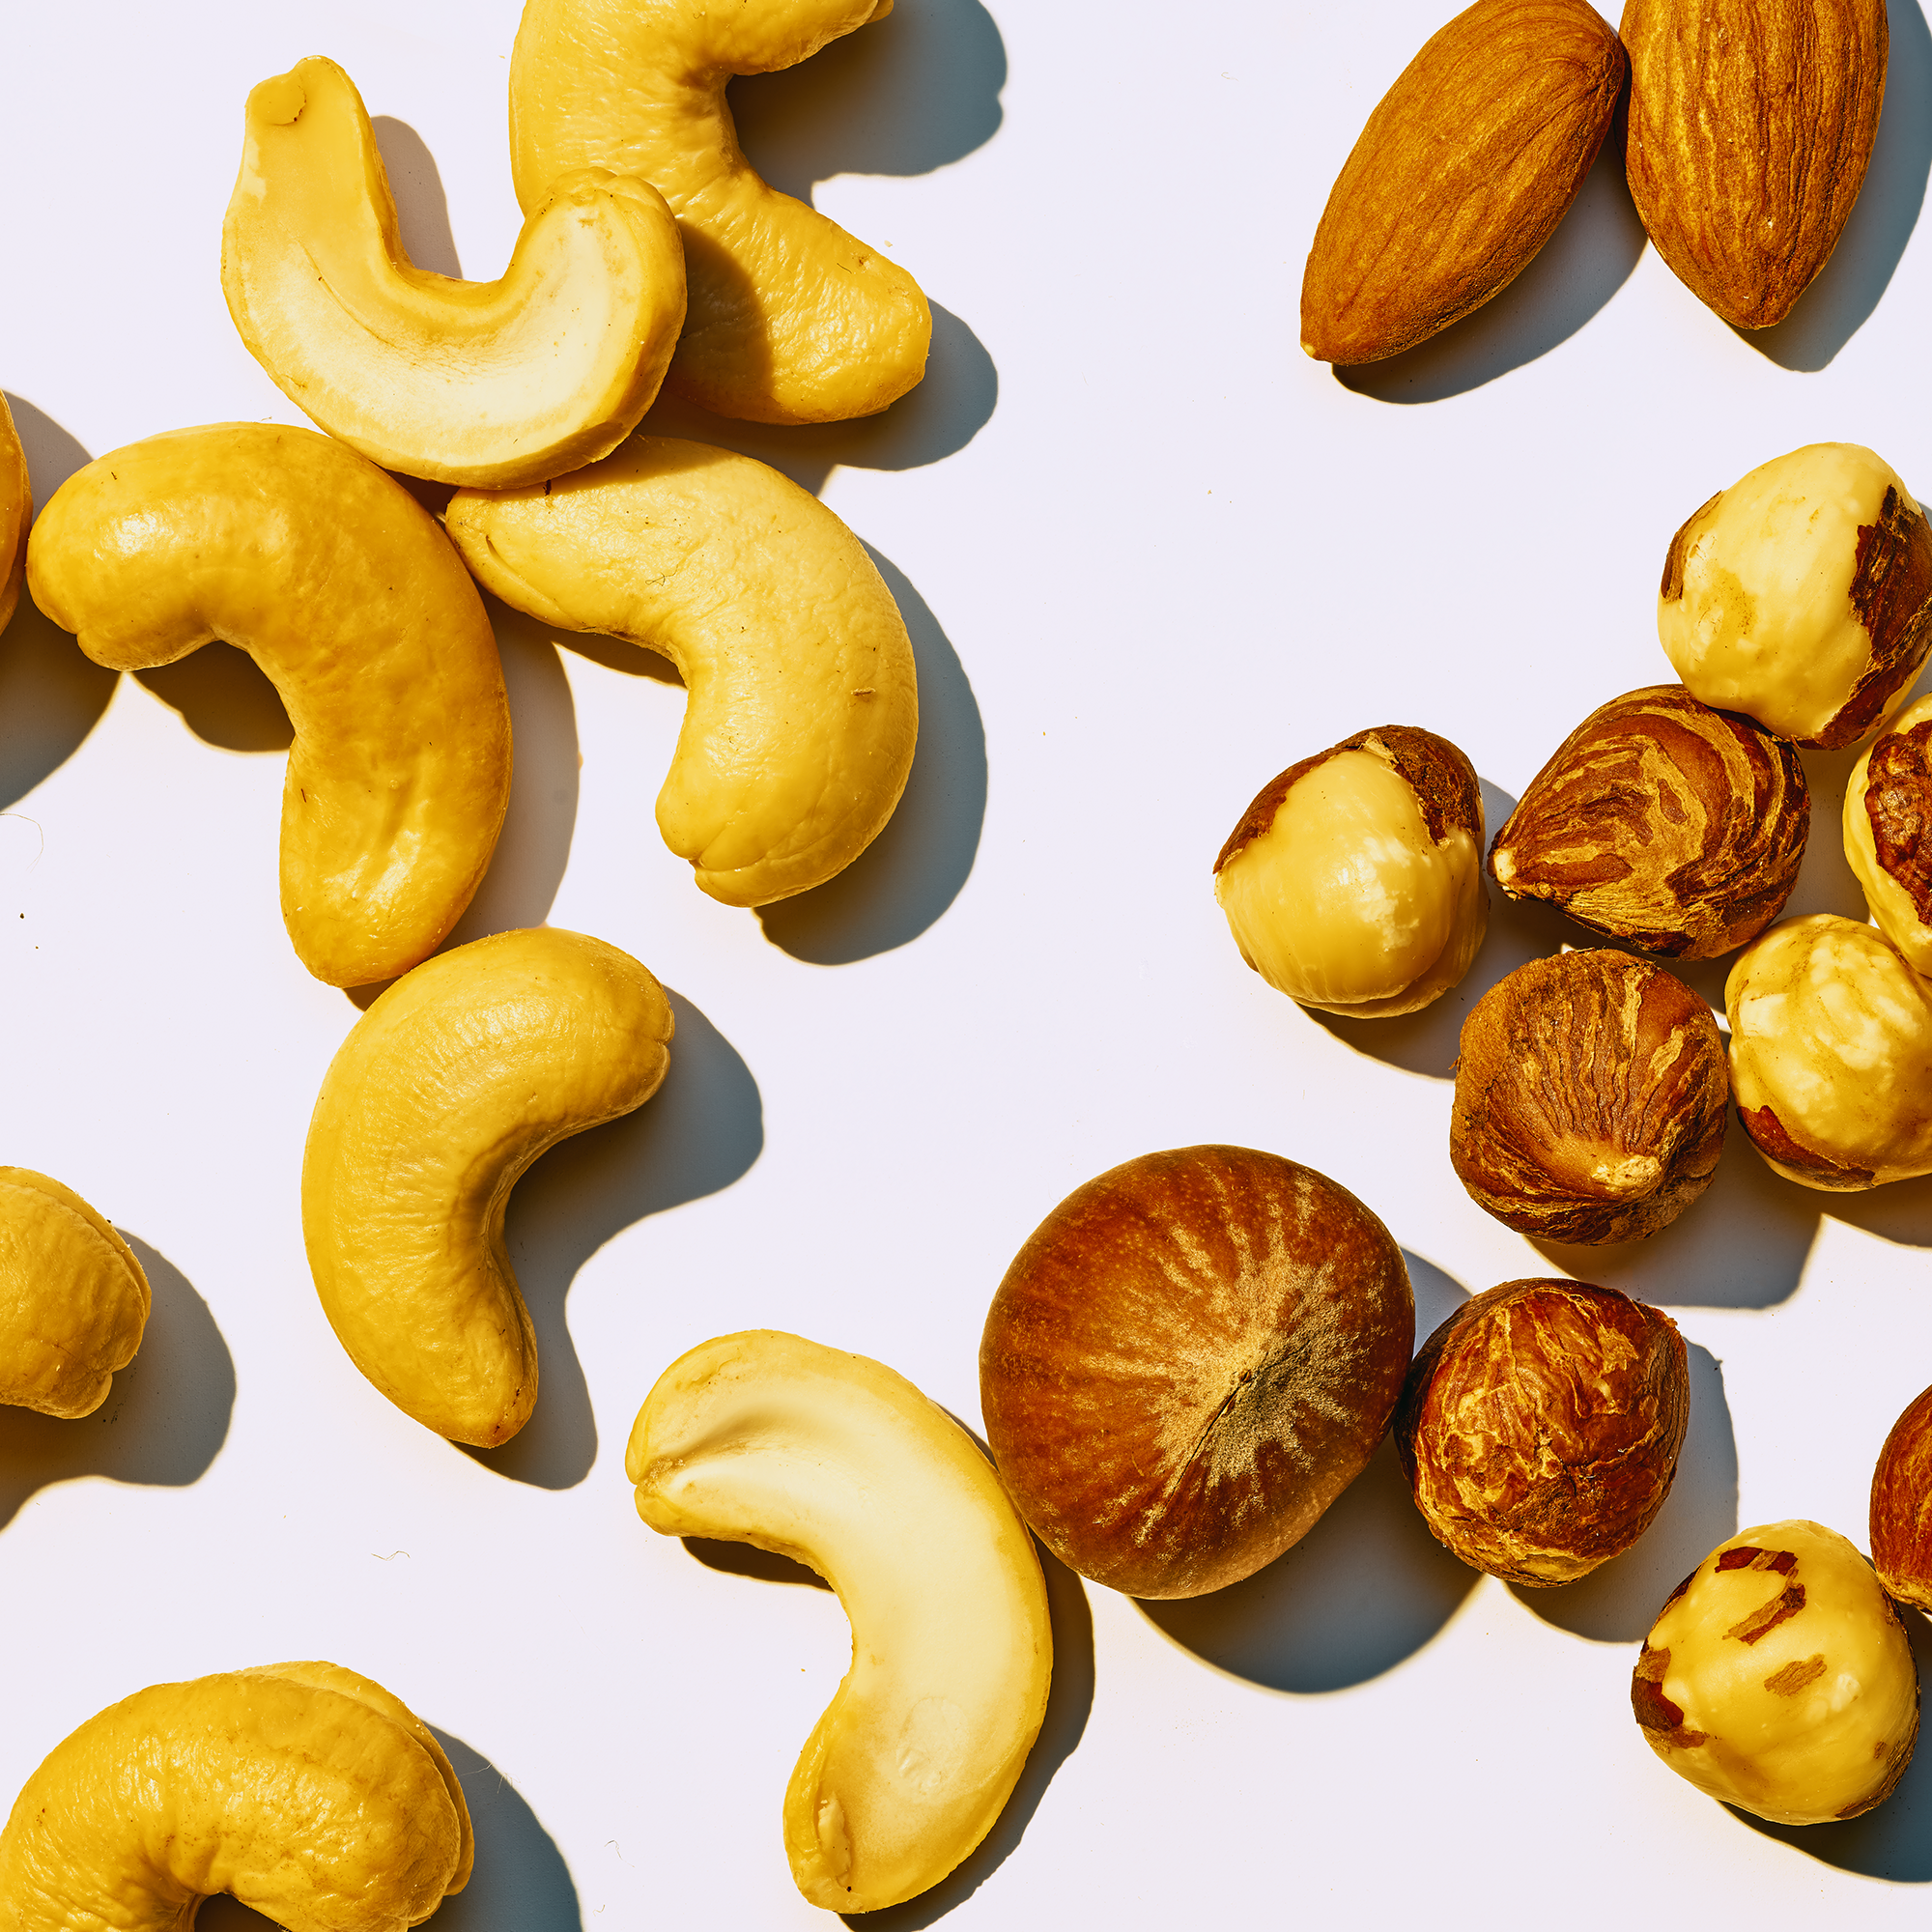 Healthiest Nuts to Add to Your Diet